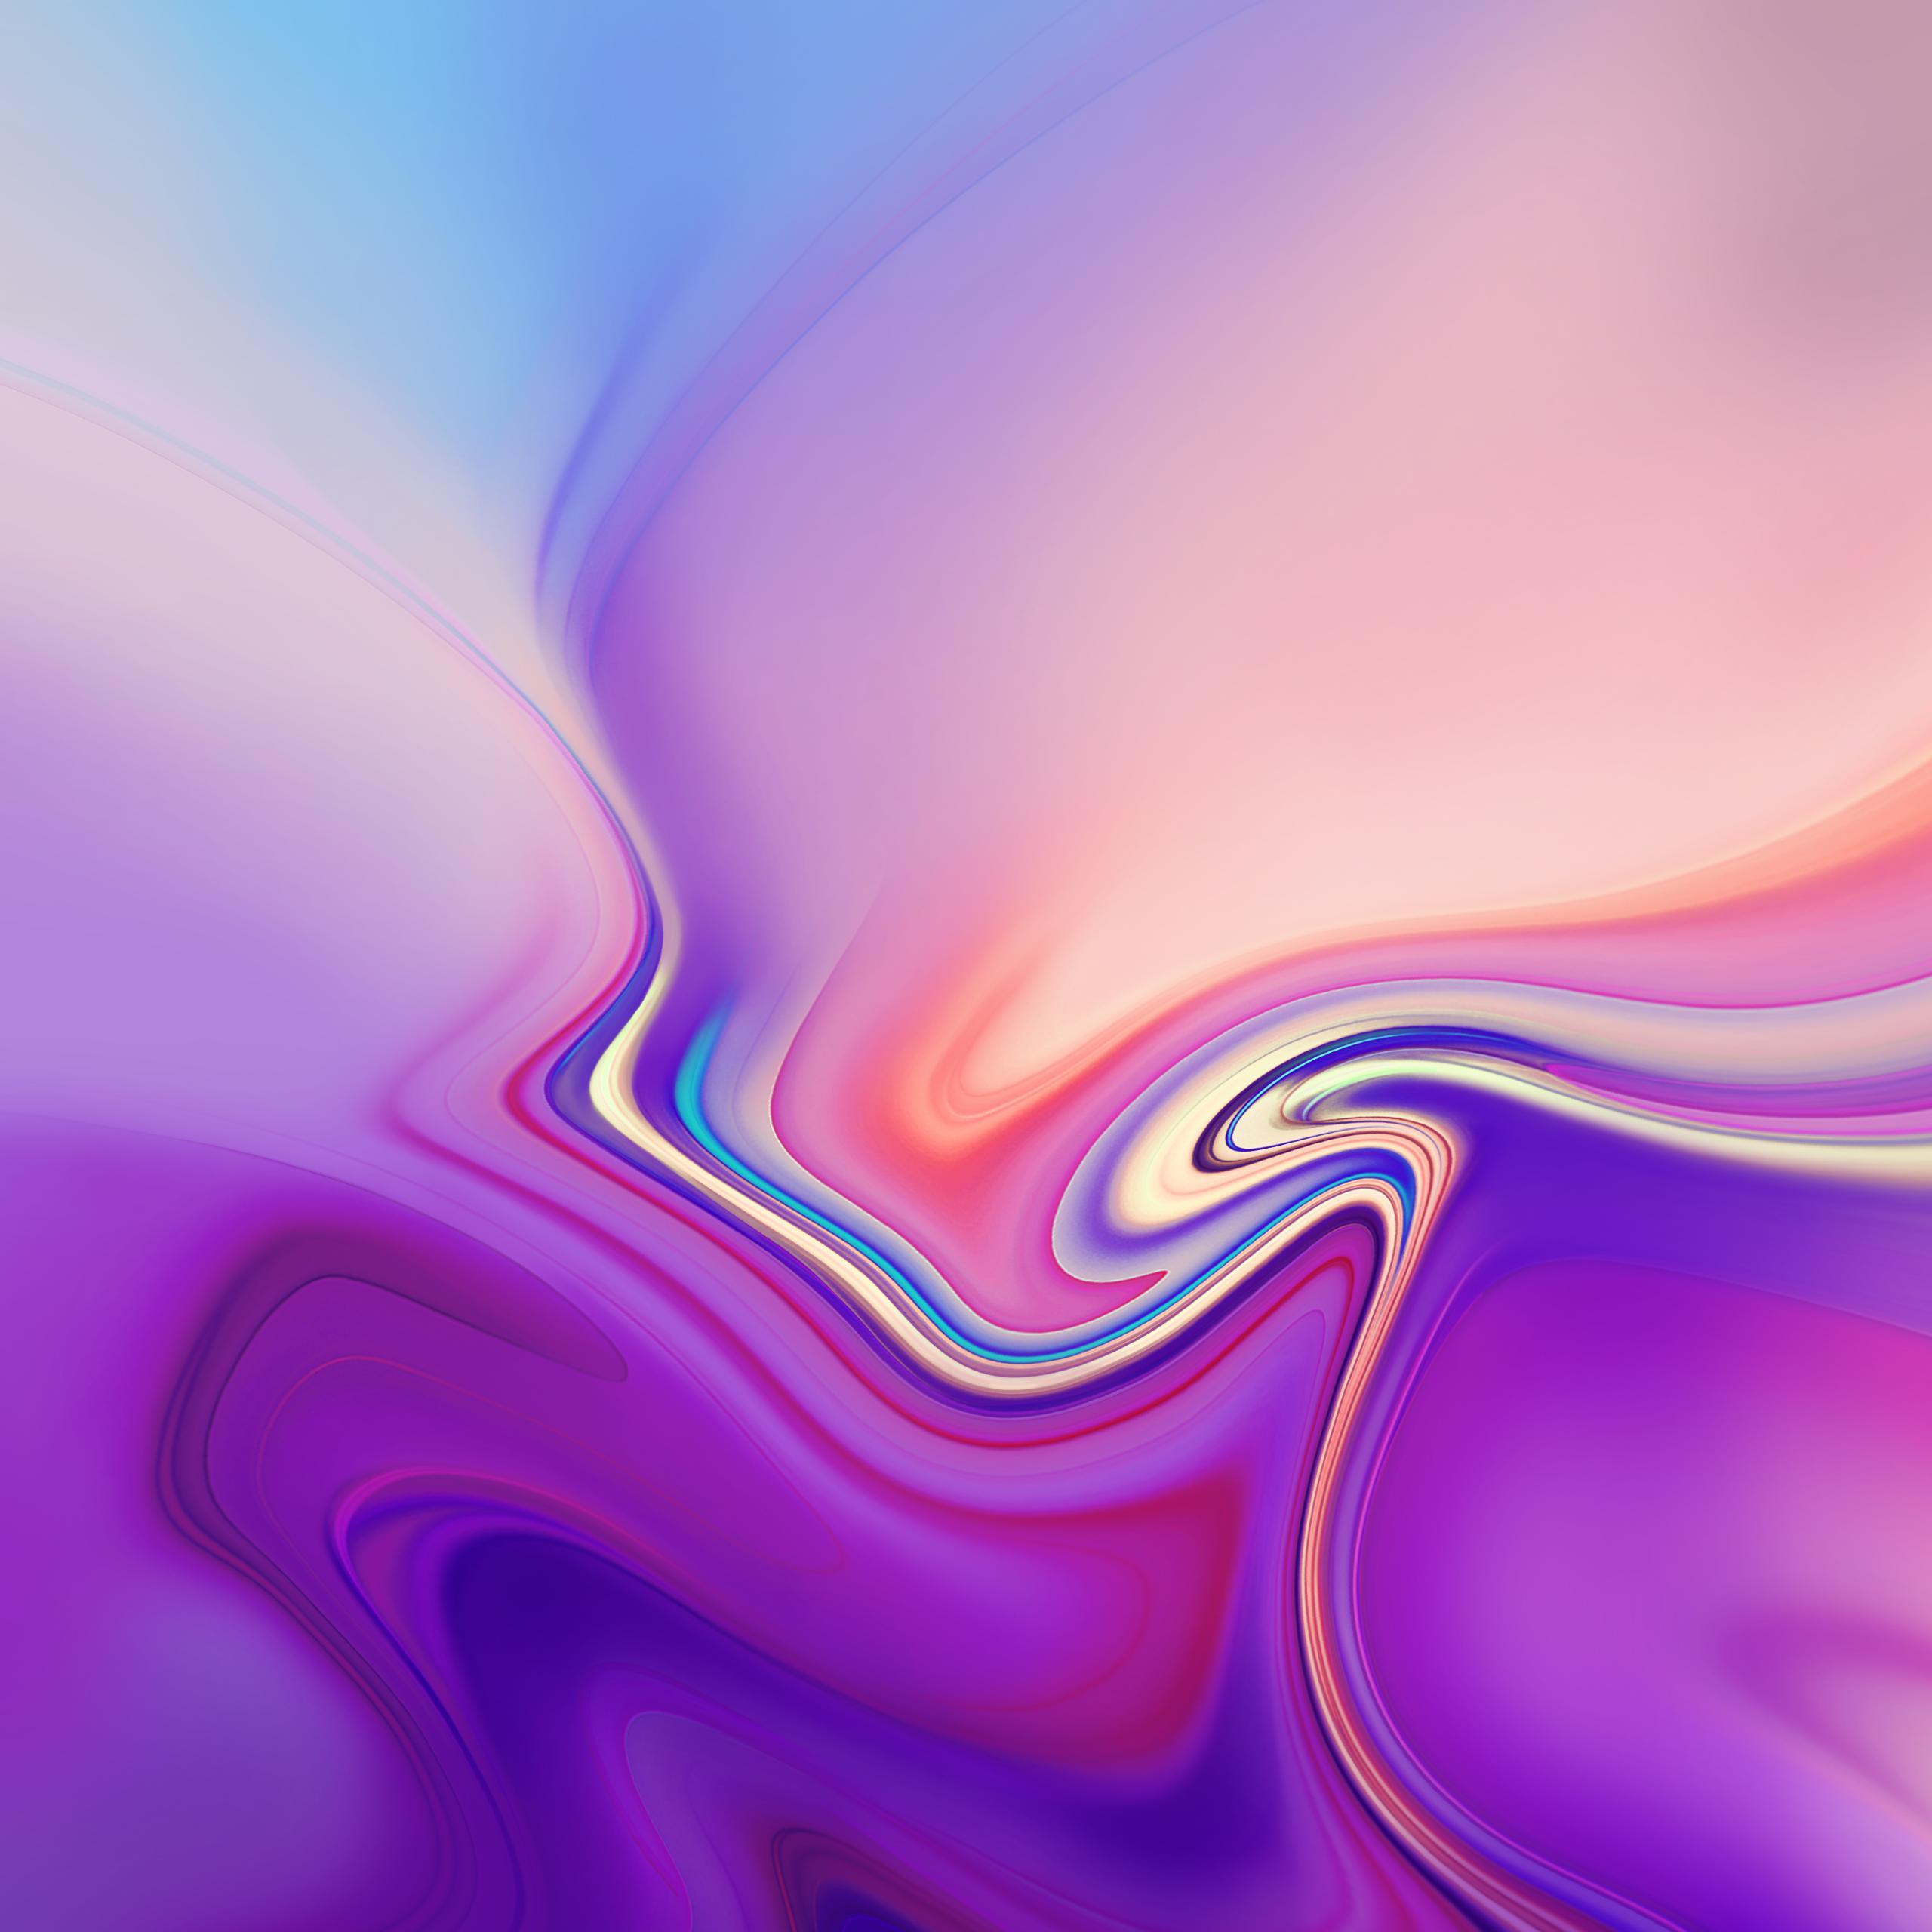 Download the official Galaxy Tab S4 wallpapers here